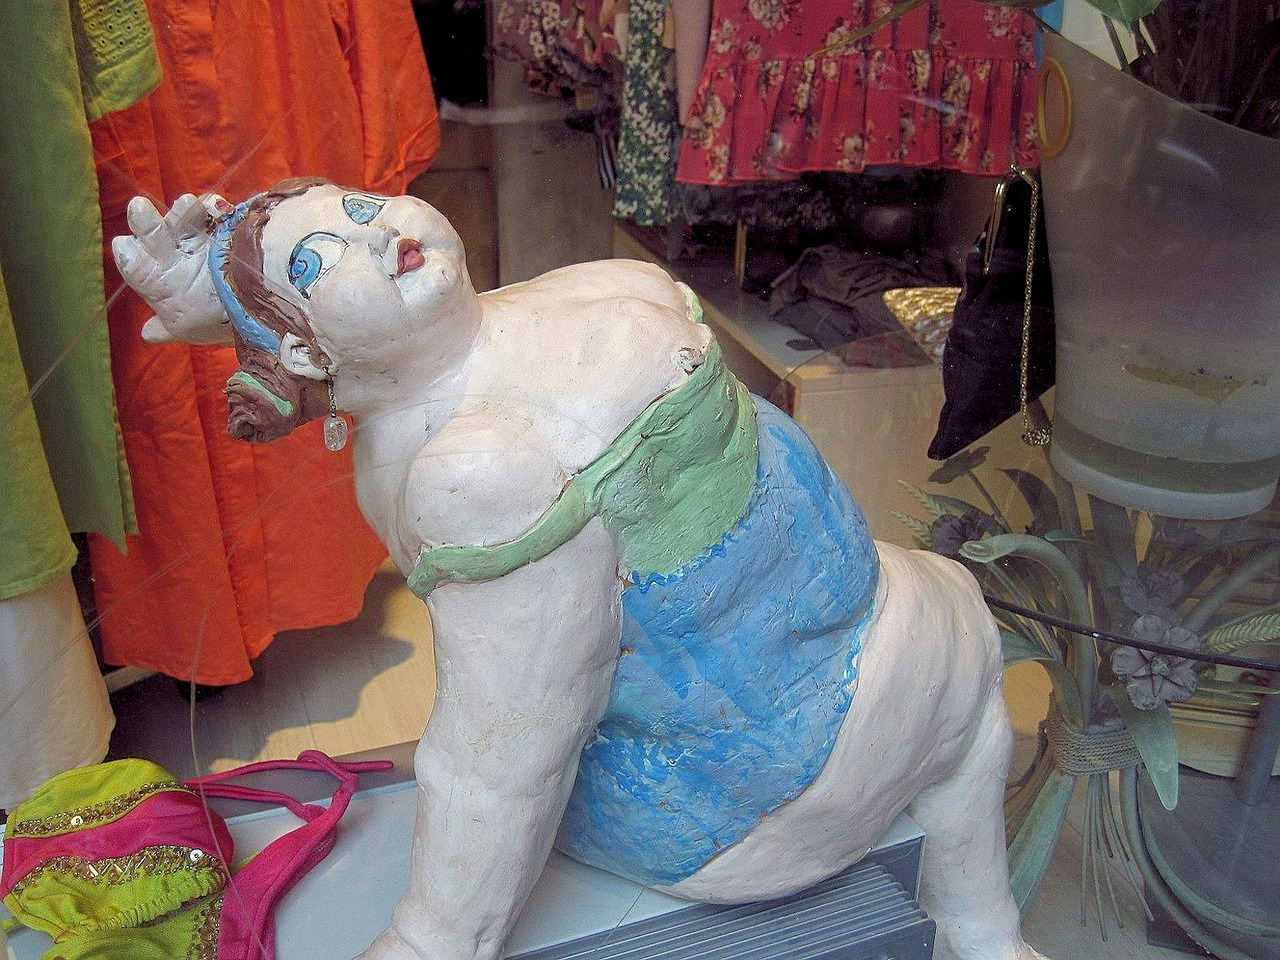 heavy lady clay sculpture shop window free photo